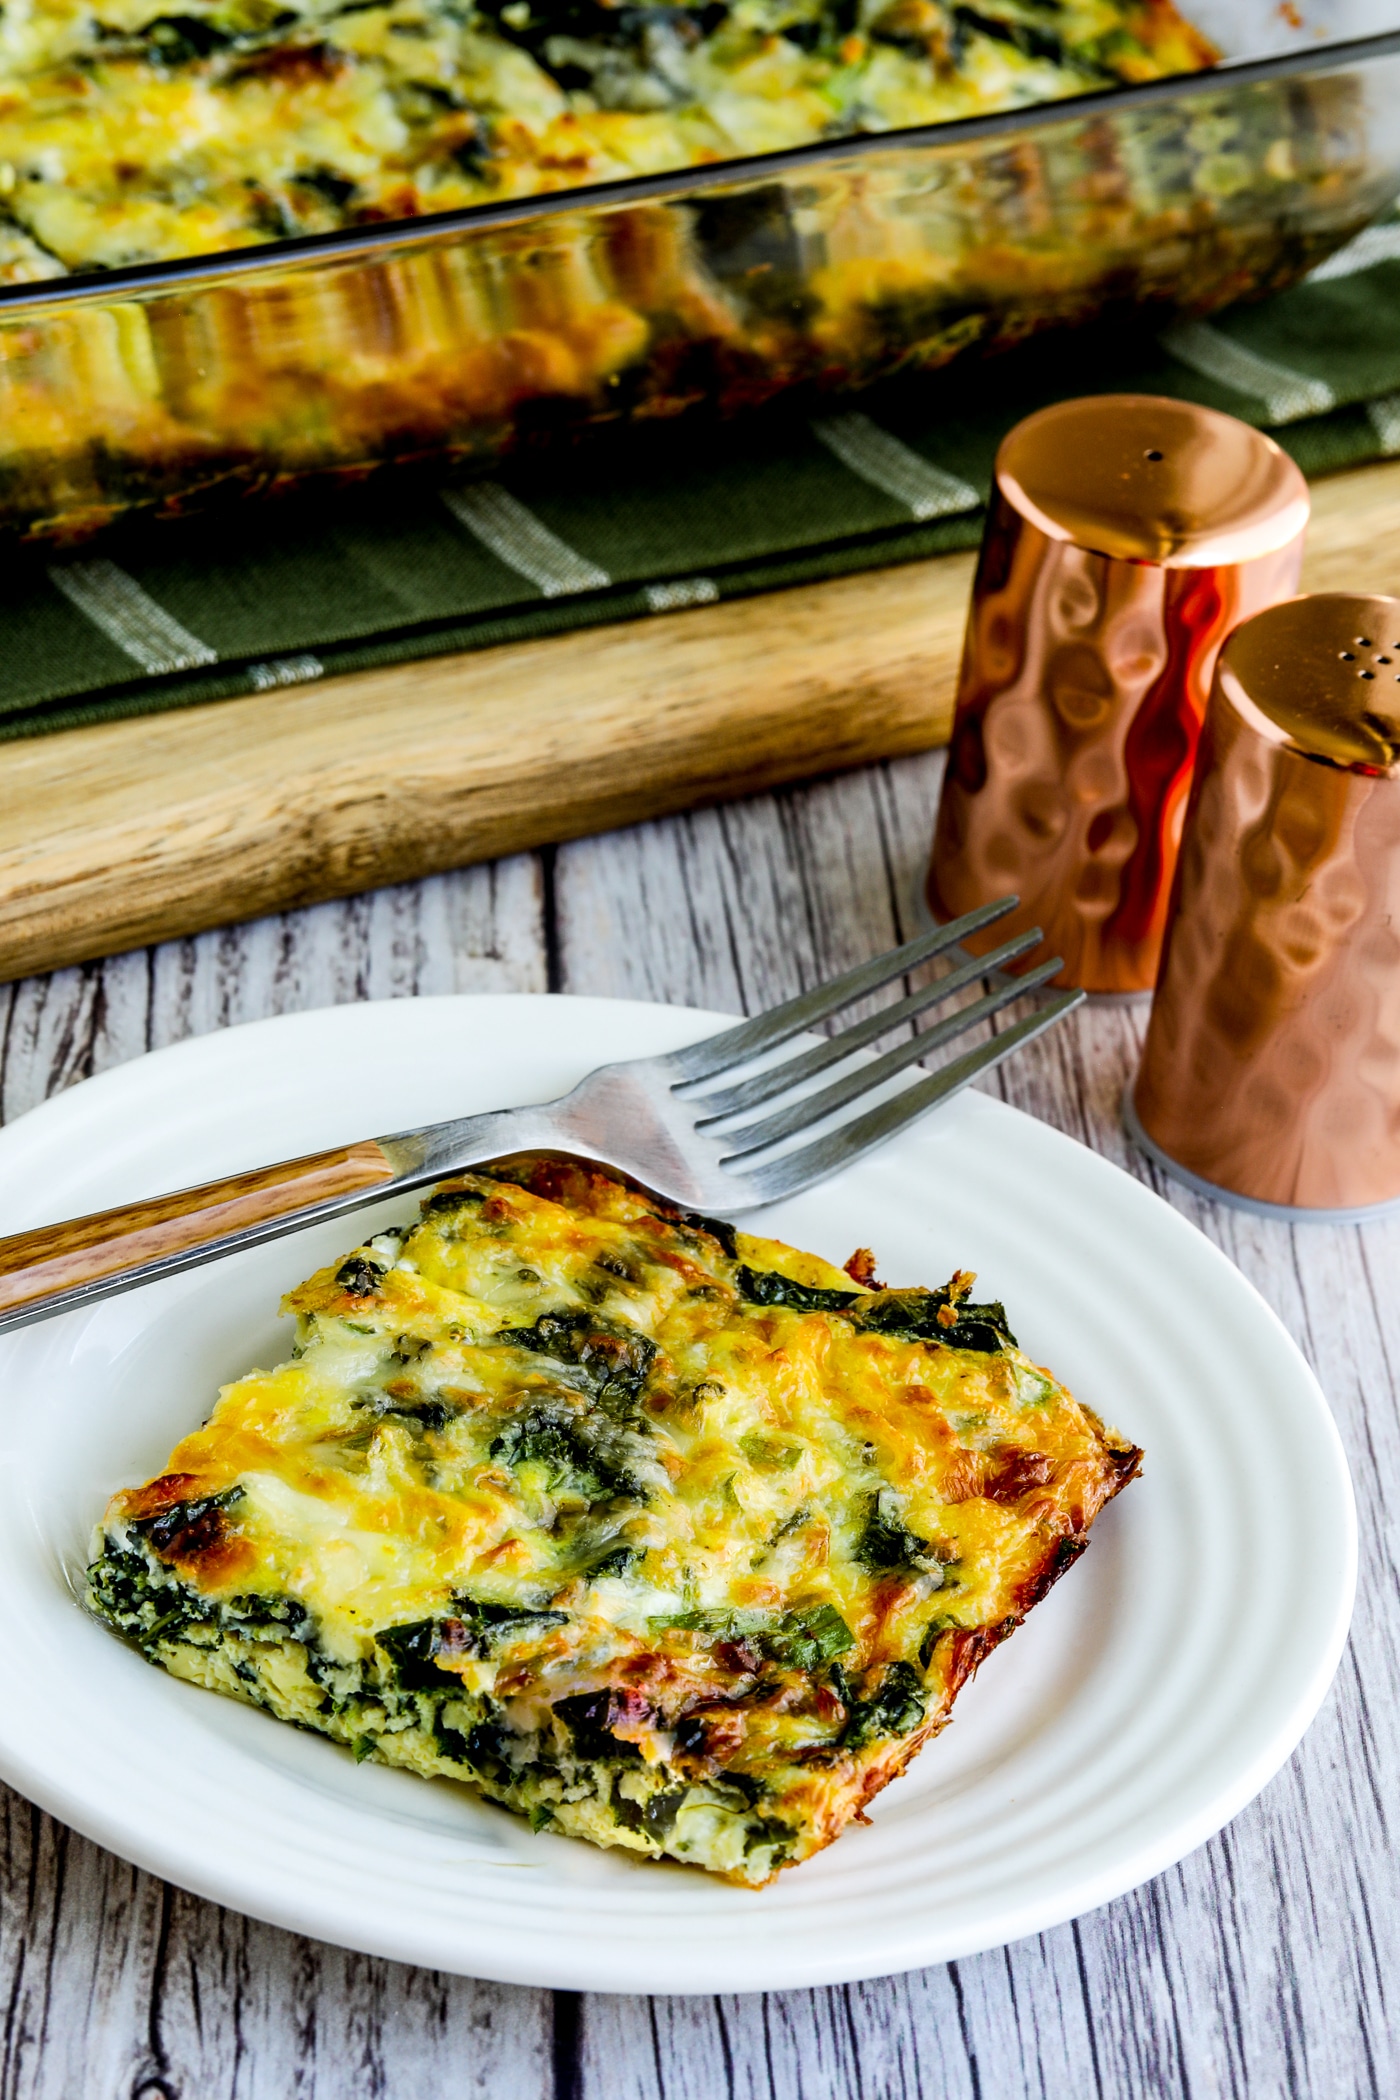 one piece of Kale, Mozzarella, and Egg Bake on plate with casserole dish in background